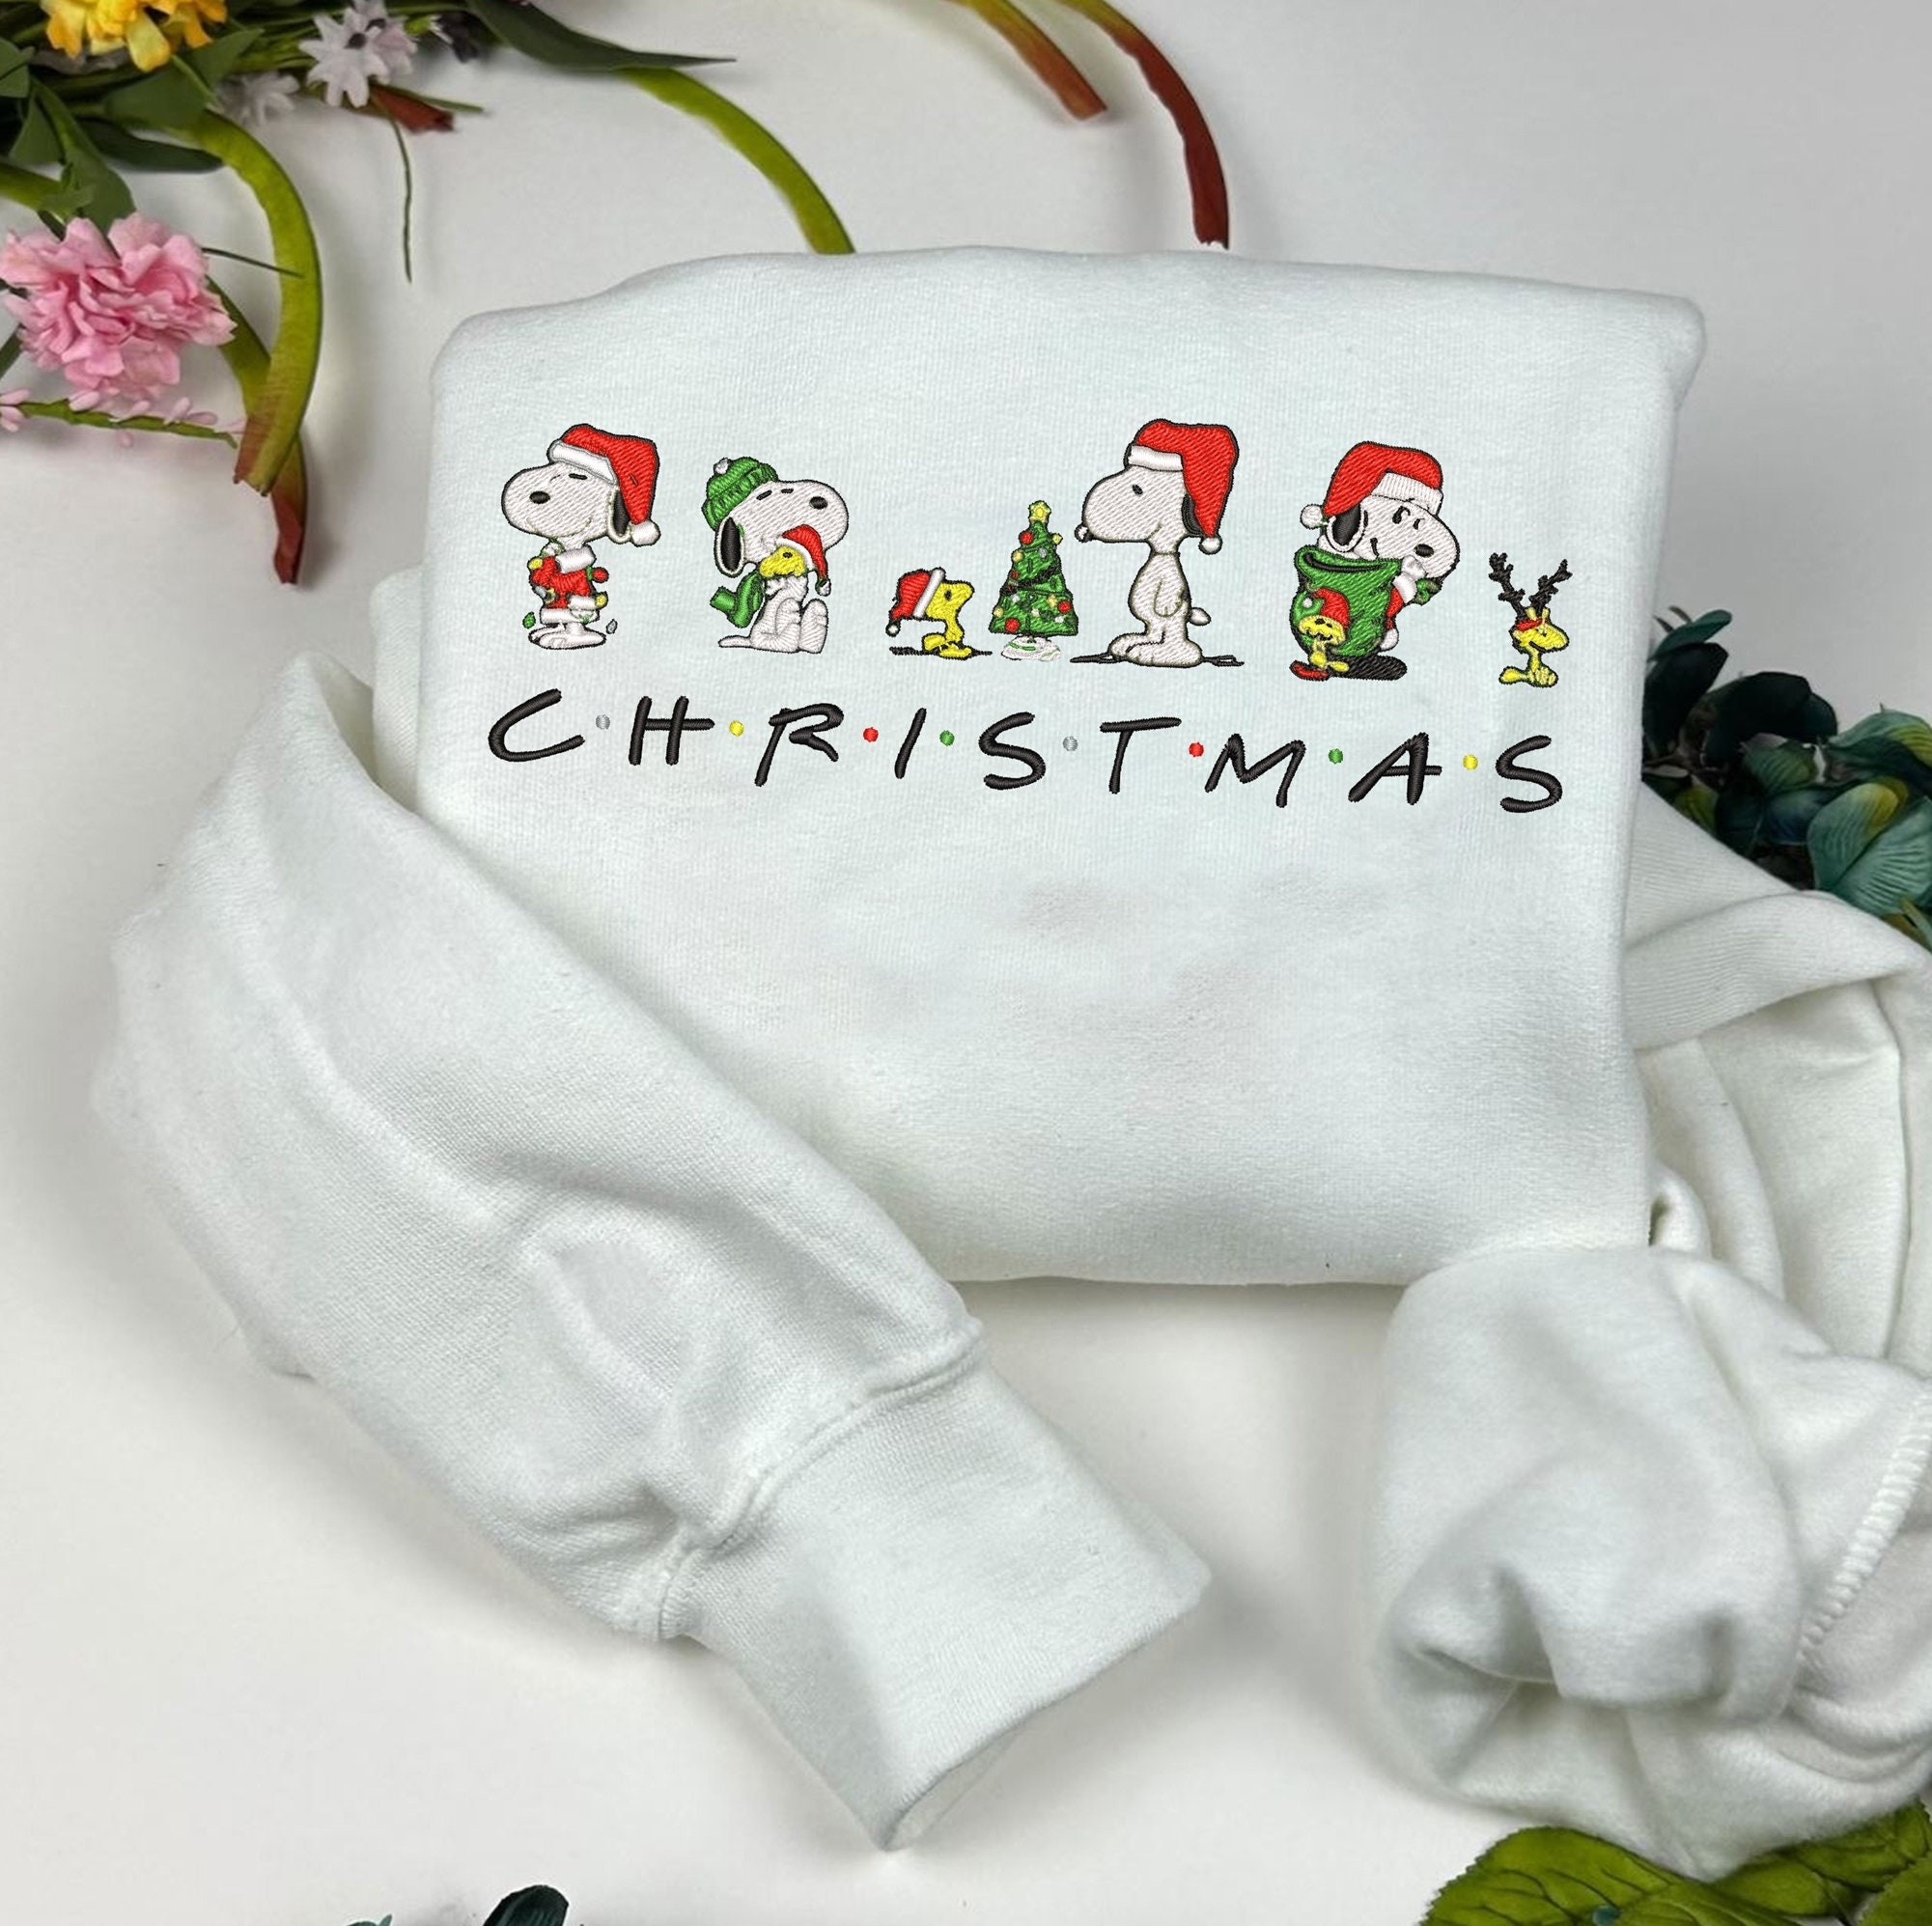 Discover Charlie Brown Snoopy Christmas Embroidered Sweatshirt